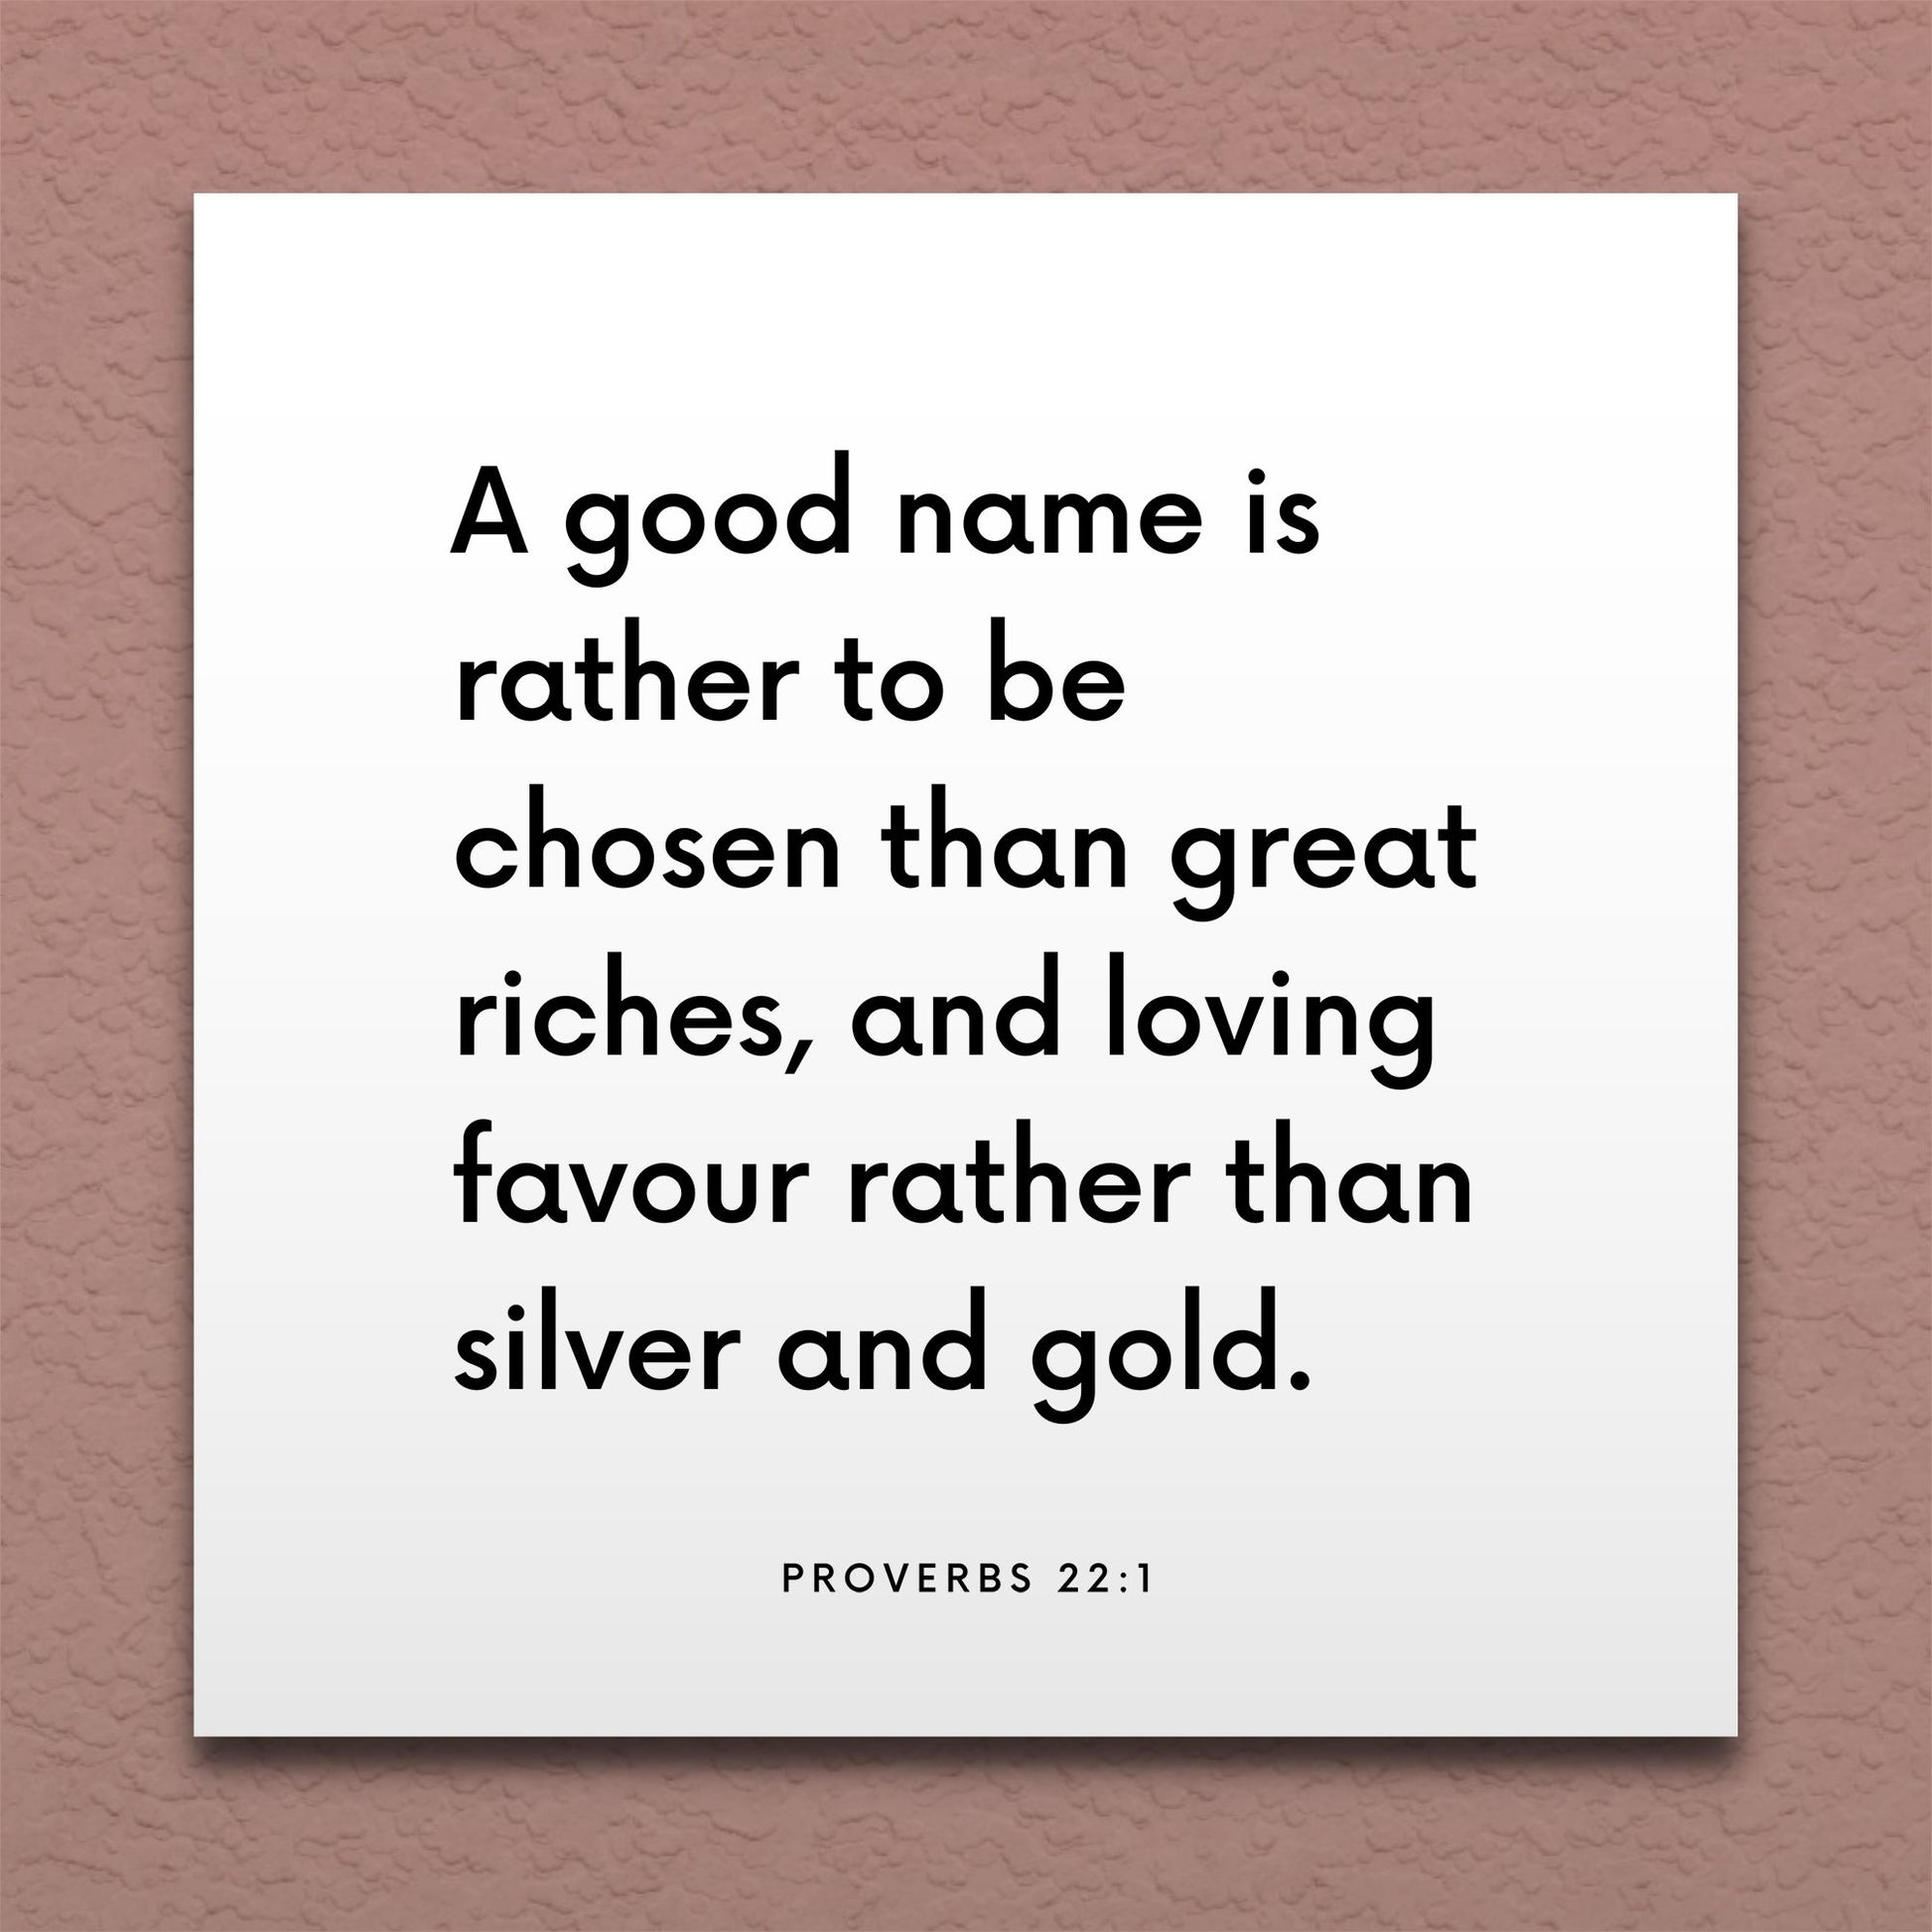 Wall-mounted scripture tile for Proverbs 22:1 - "A good name is rather to be chosen than great riches"